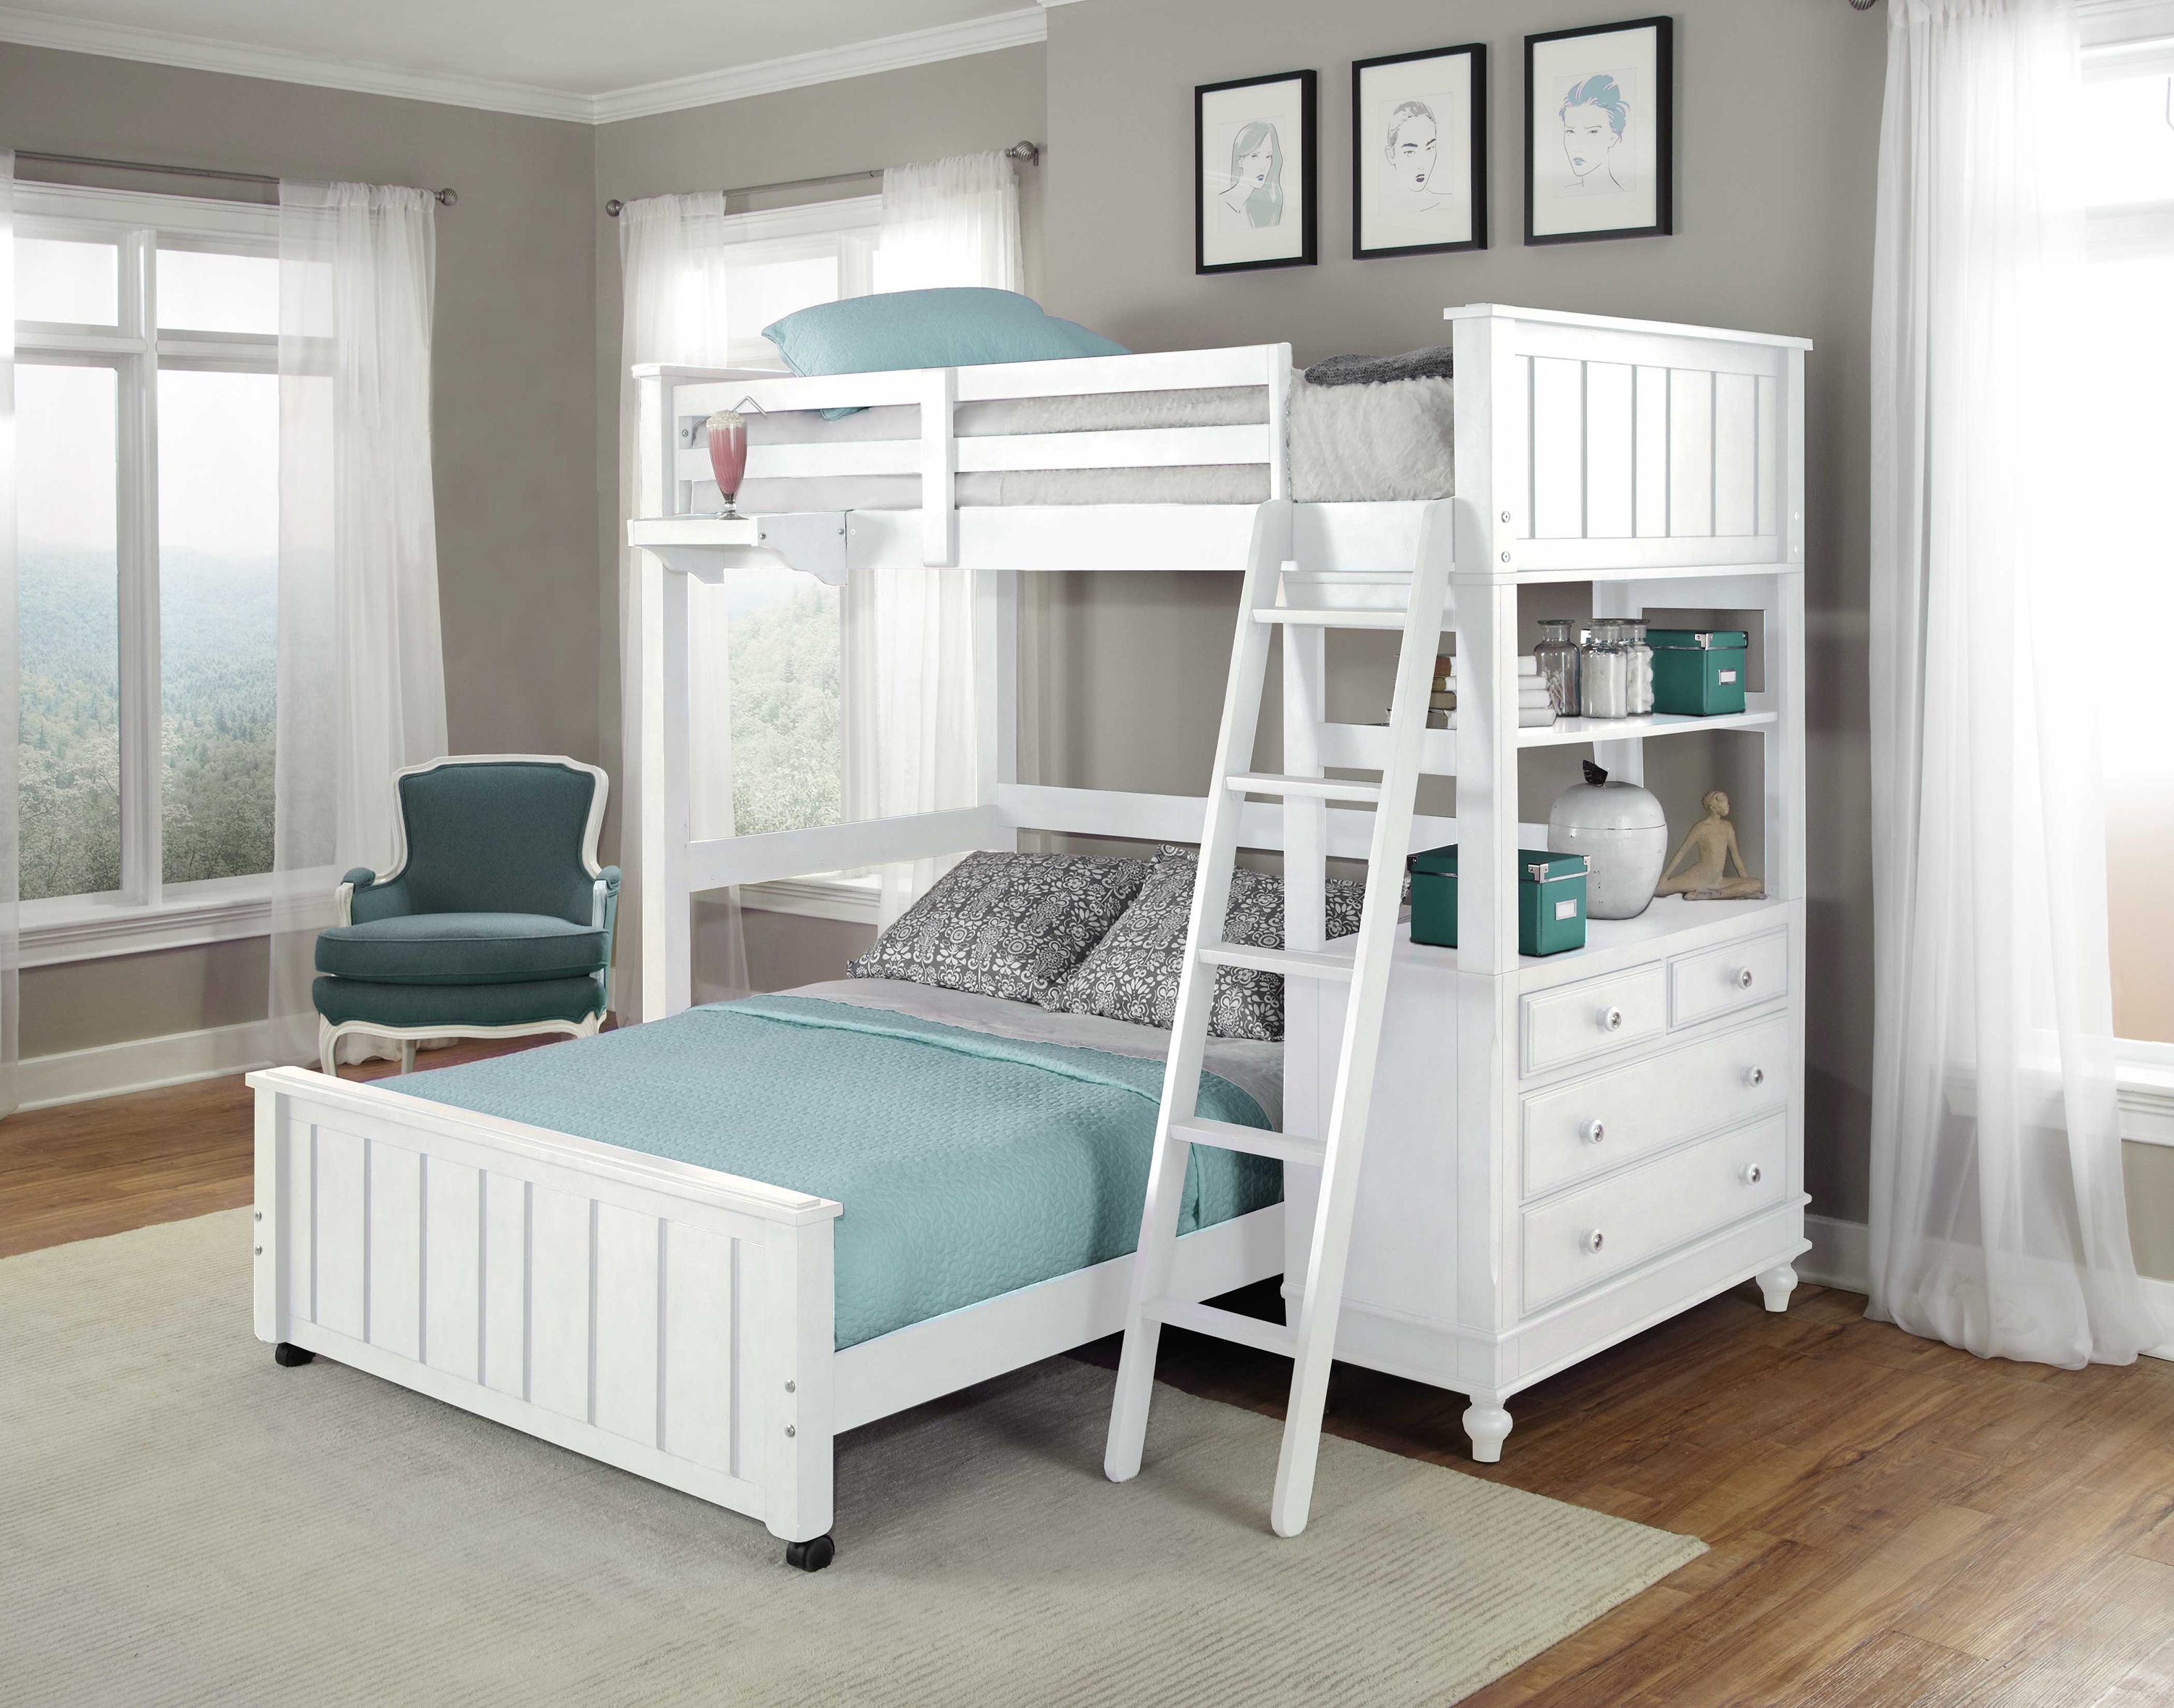 twin bed for teenager